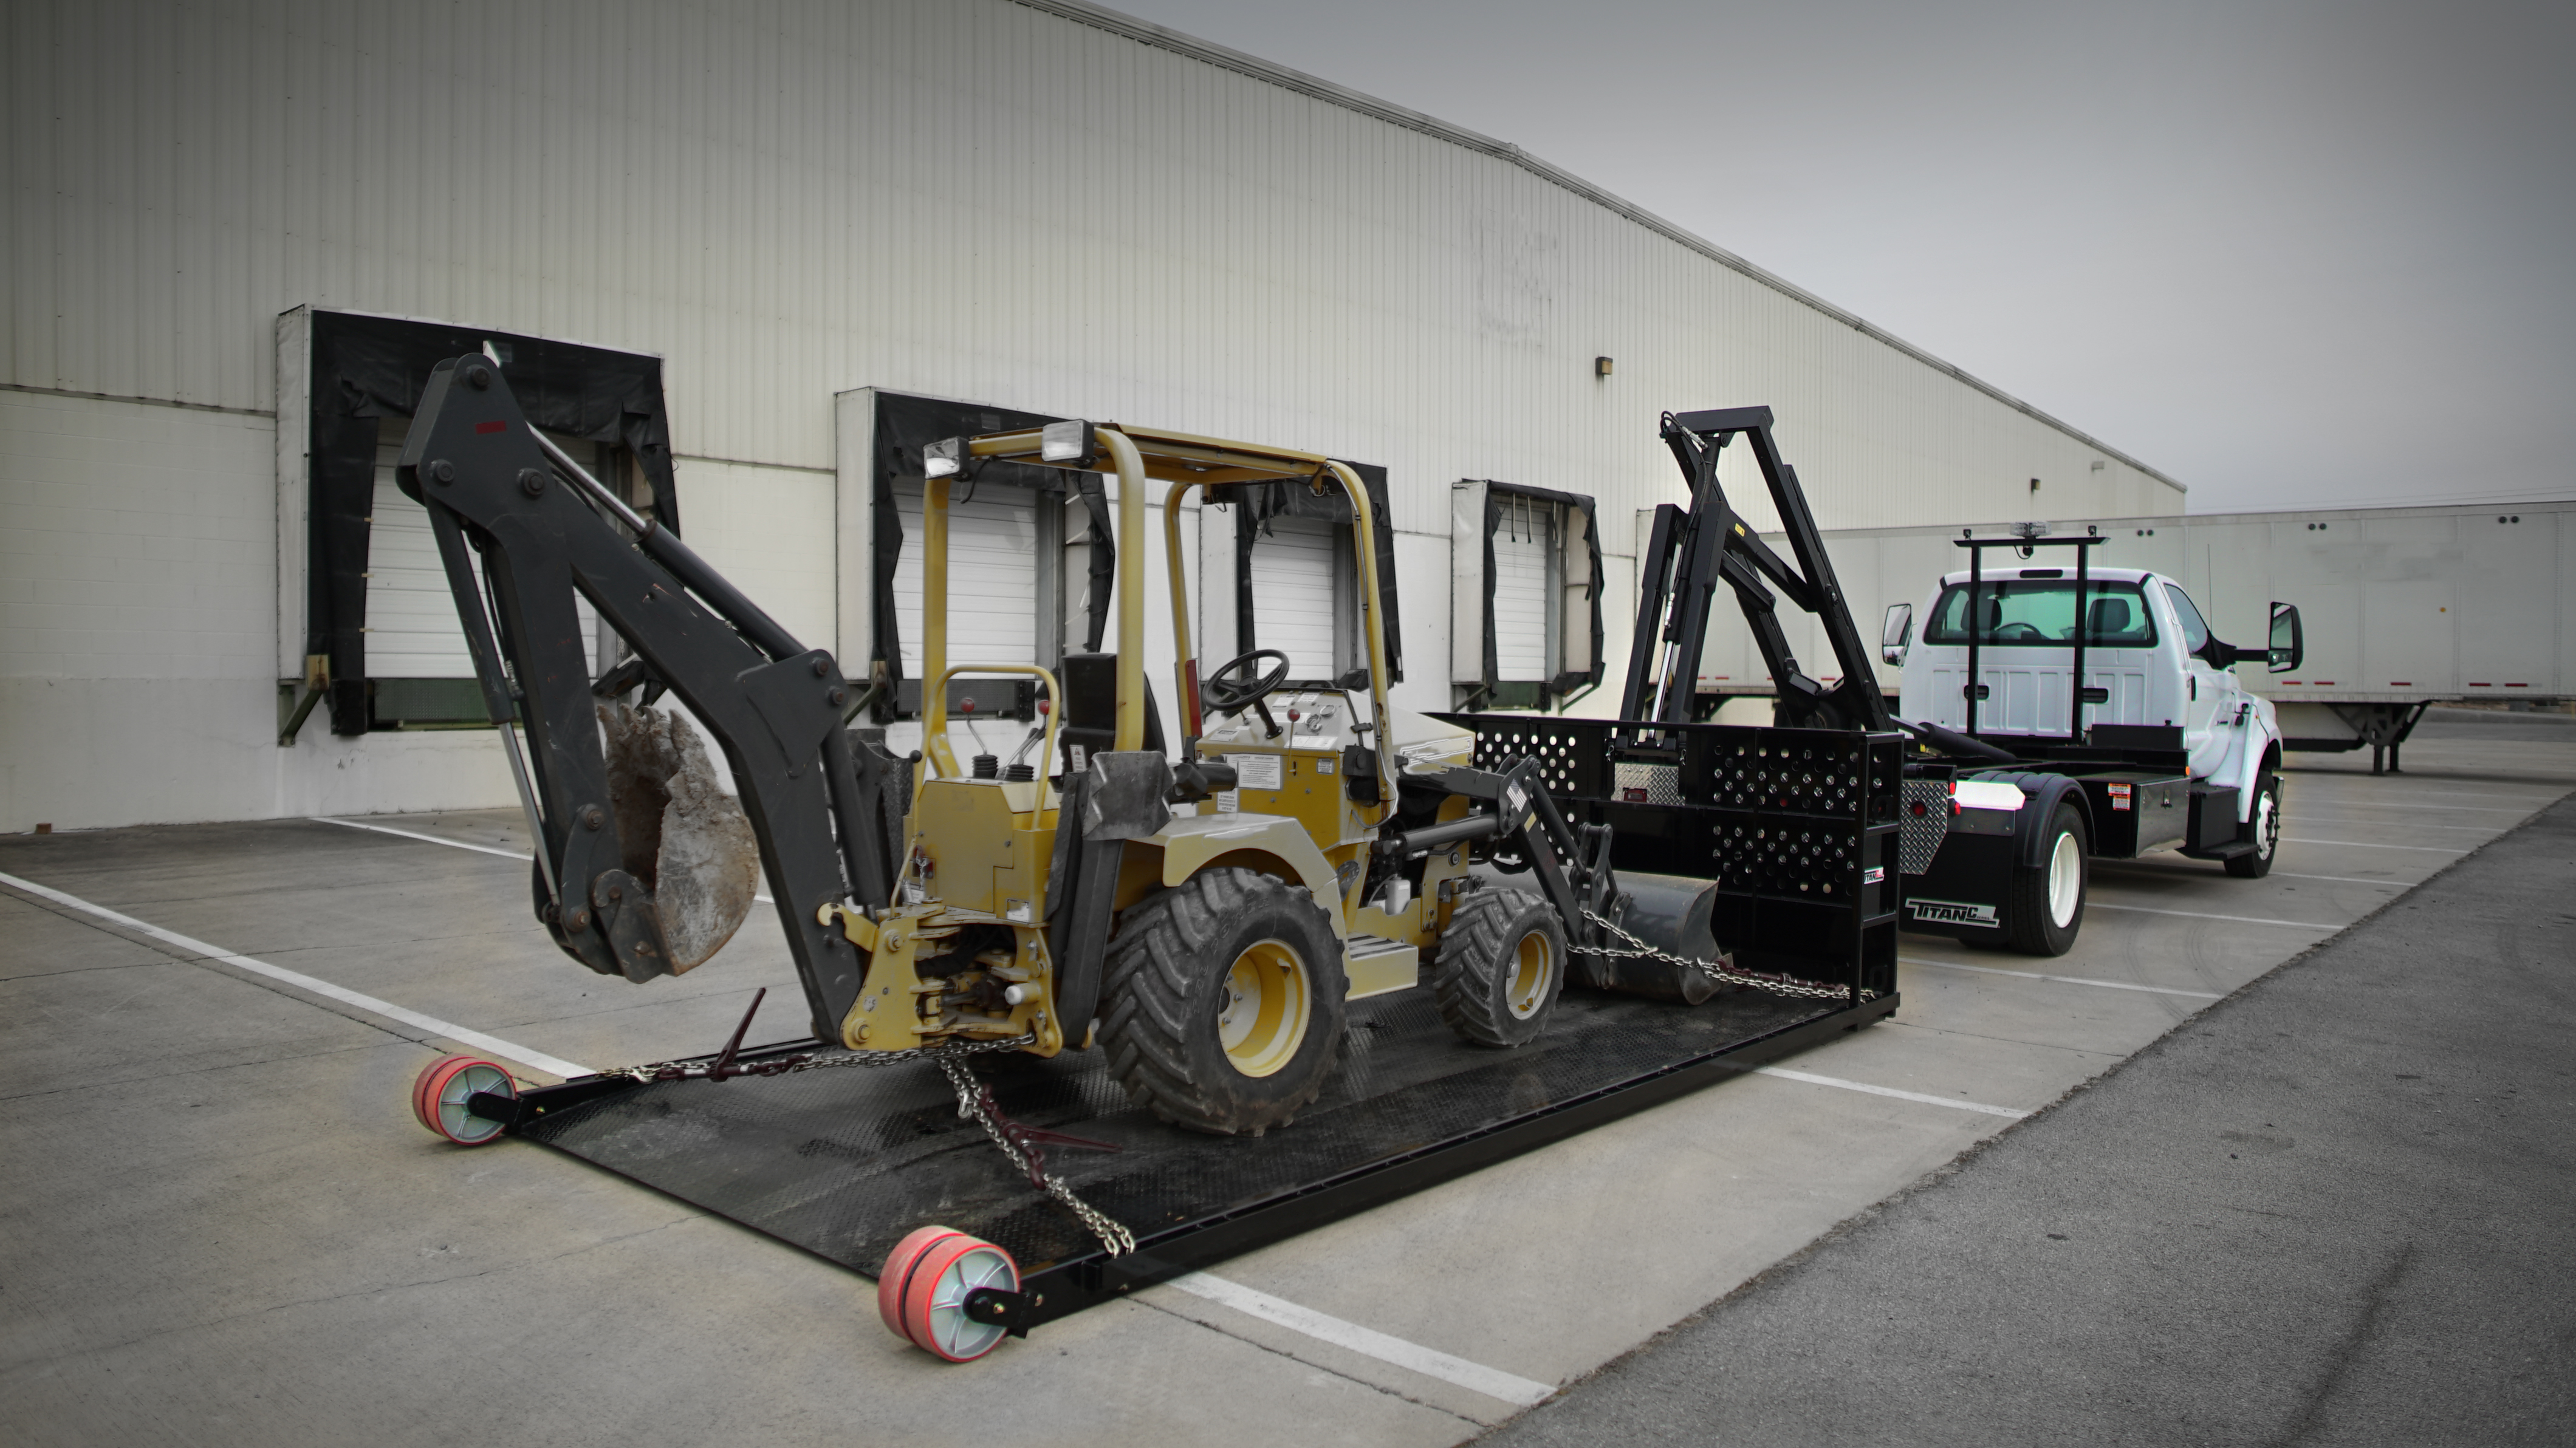 Titan® C-Series is a very diverse vehicle for hauling equipment and freight